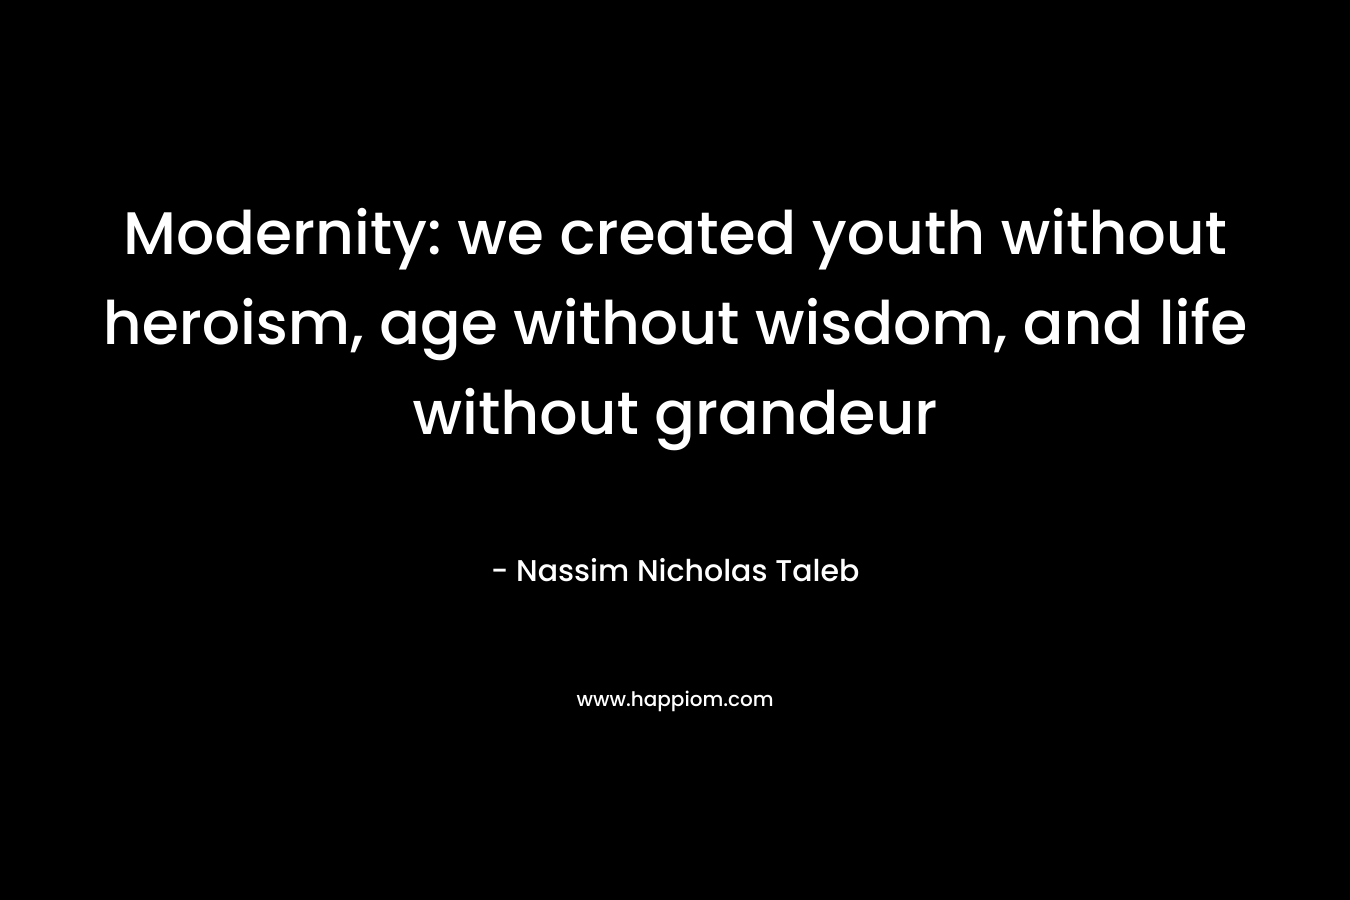 Modernity: we created youth without heroism, age without wisdom, and life without grandeur